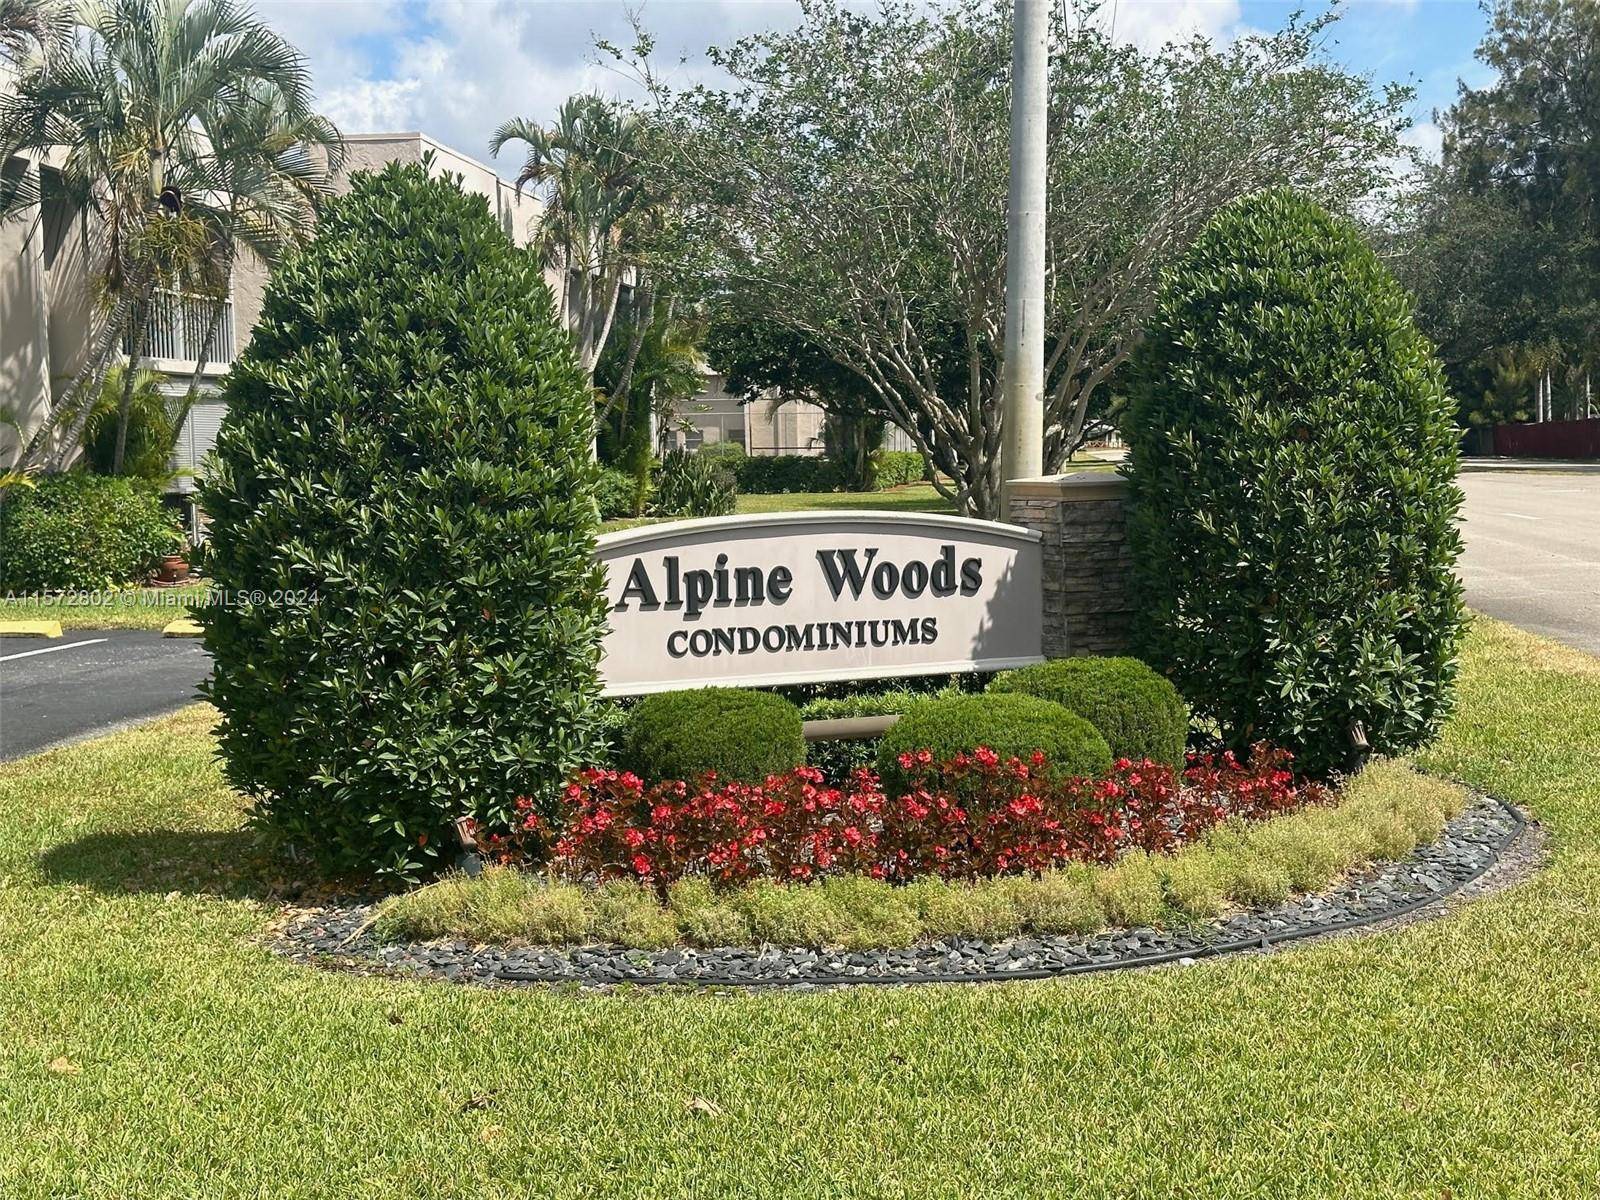 QUIET GARDEN CONDO IN ALPINE WOODS FANTASTIC HARD TO FIND 3BR 2BA ; UPGRADED CABINETS, CLOSETS, PORCELAIN FLOORS, STAINLESS STEEL APPL ; WASHER DRYER IN UNIT ; IMPACT WINDOWS, STEPS ...